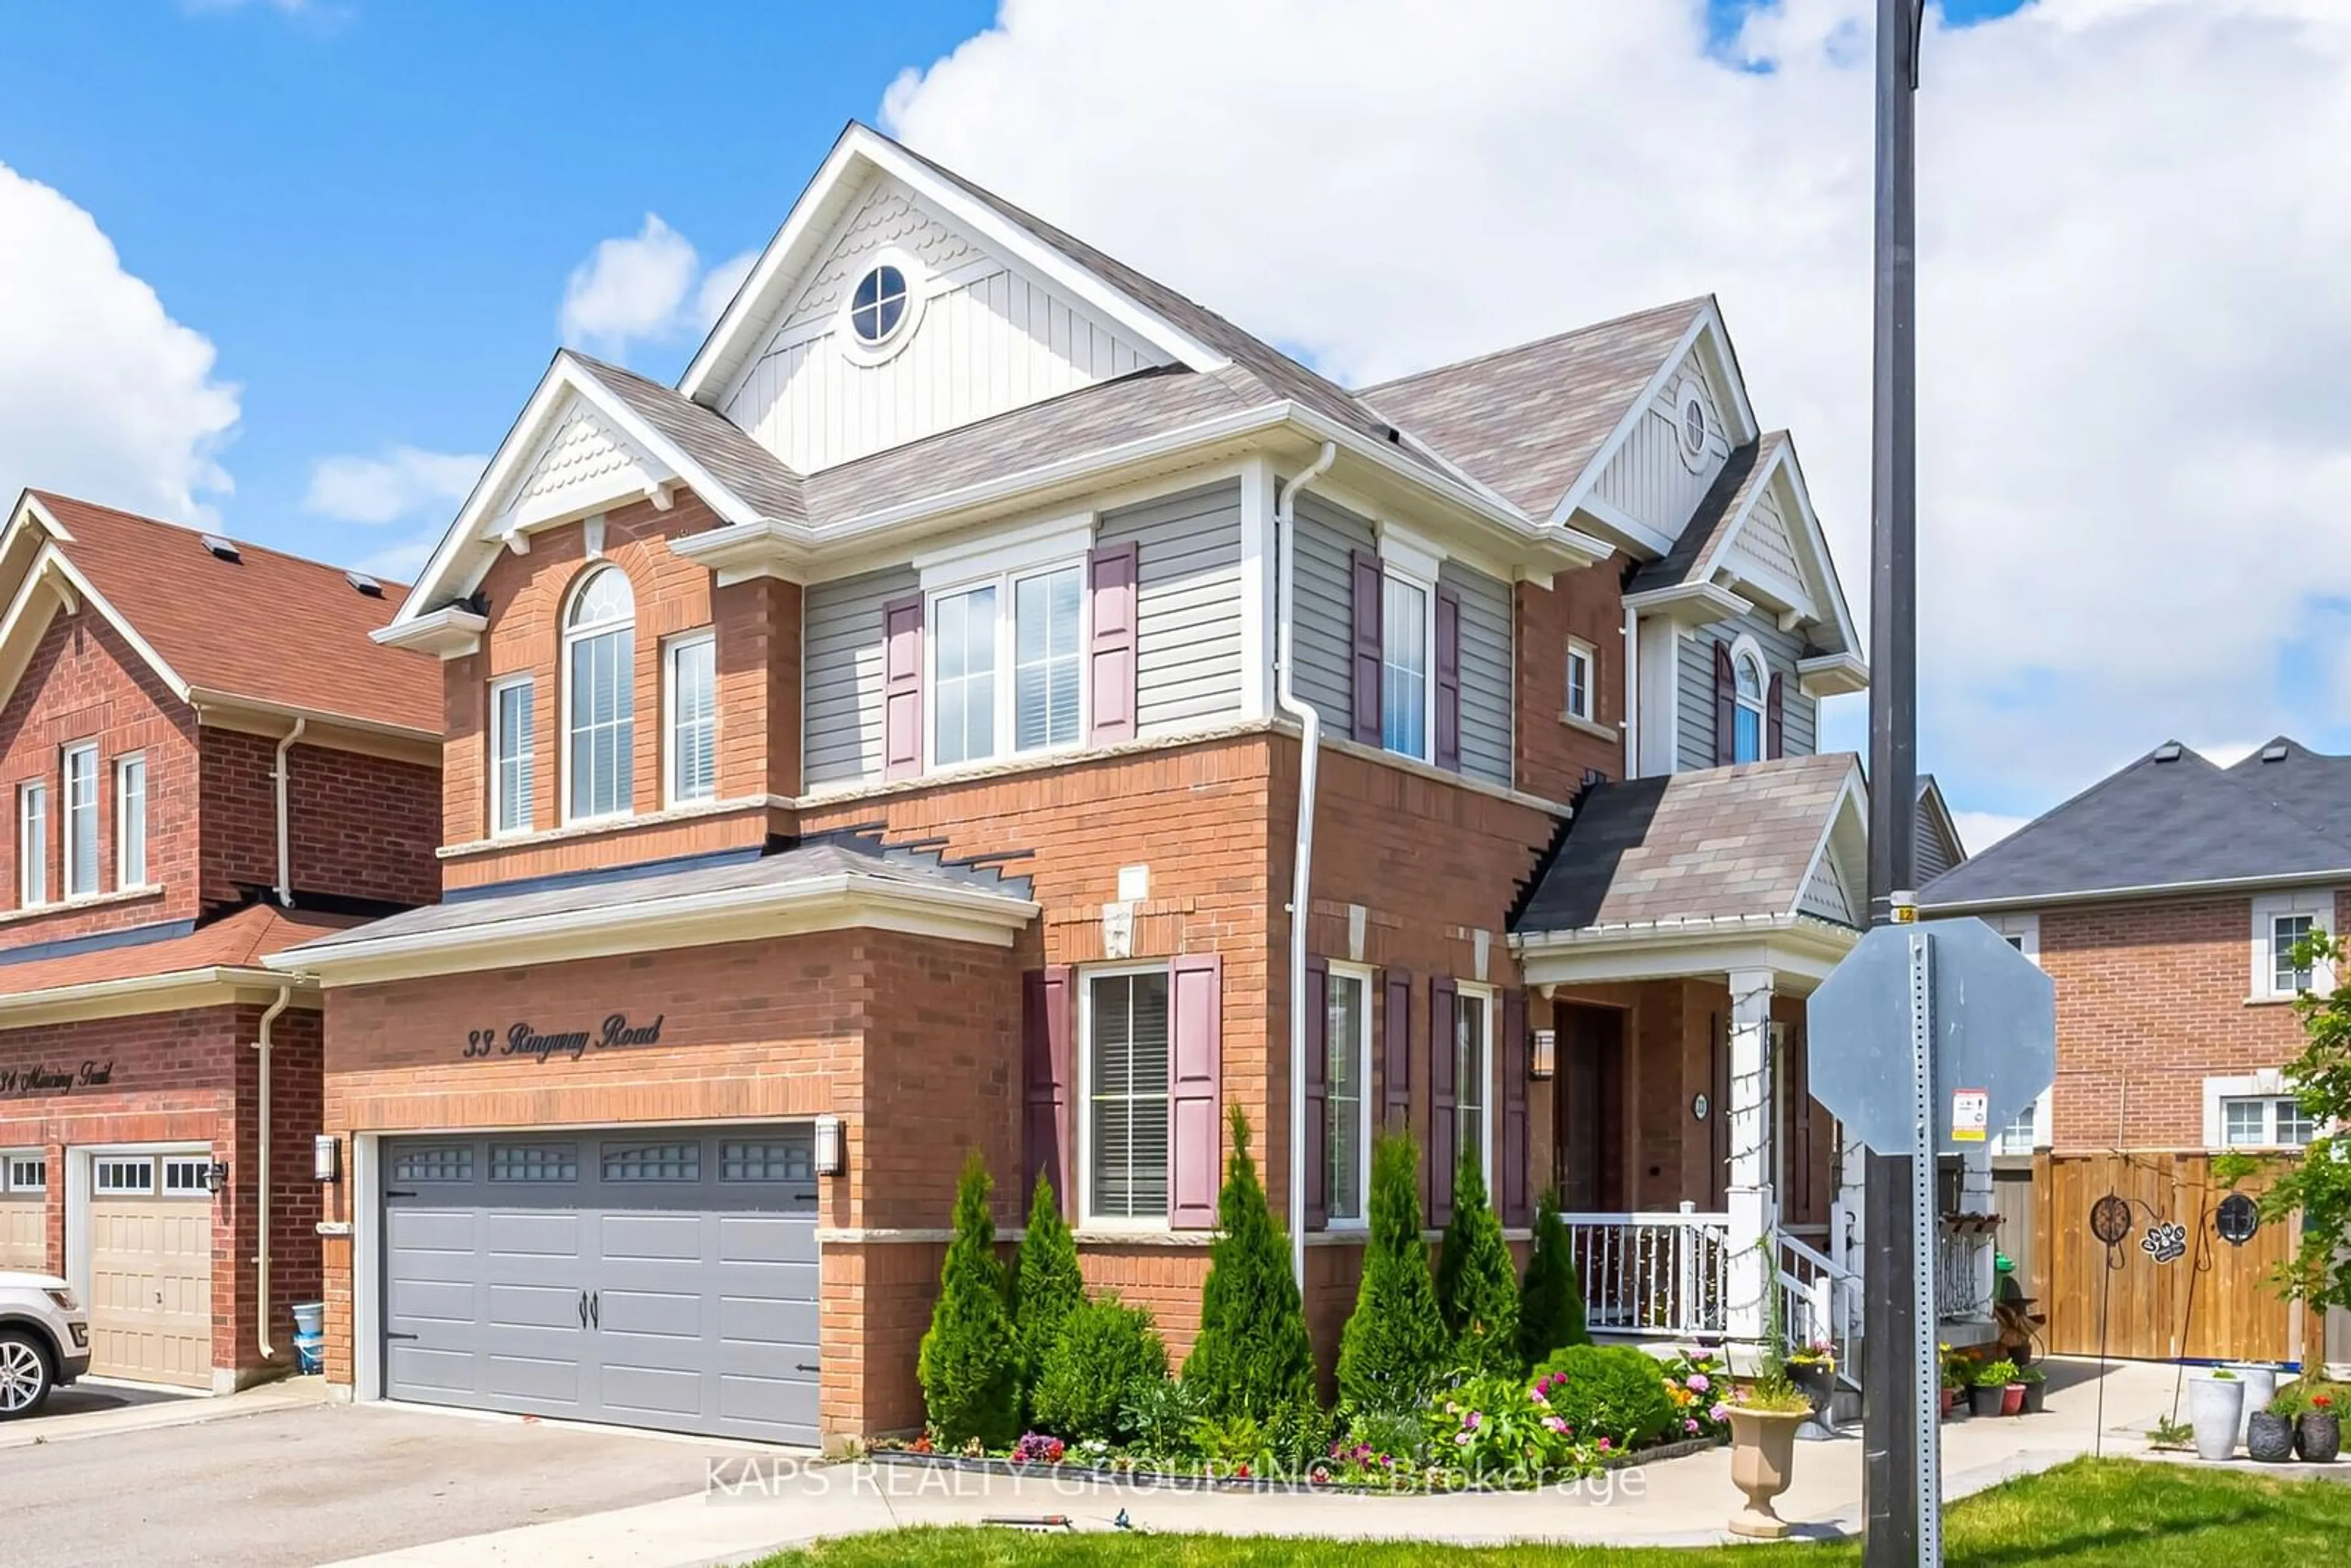 Home with brick exterior material for 33 Ringway Rd, Brampton Ontario L7A 4T3